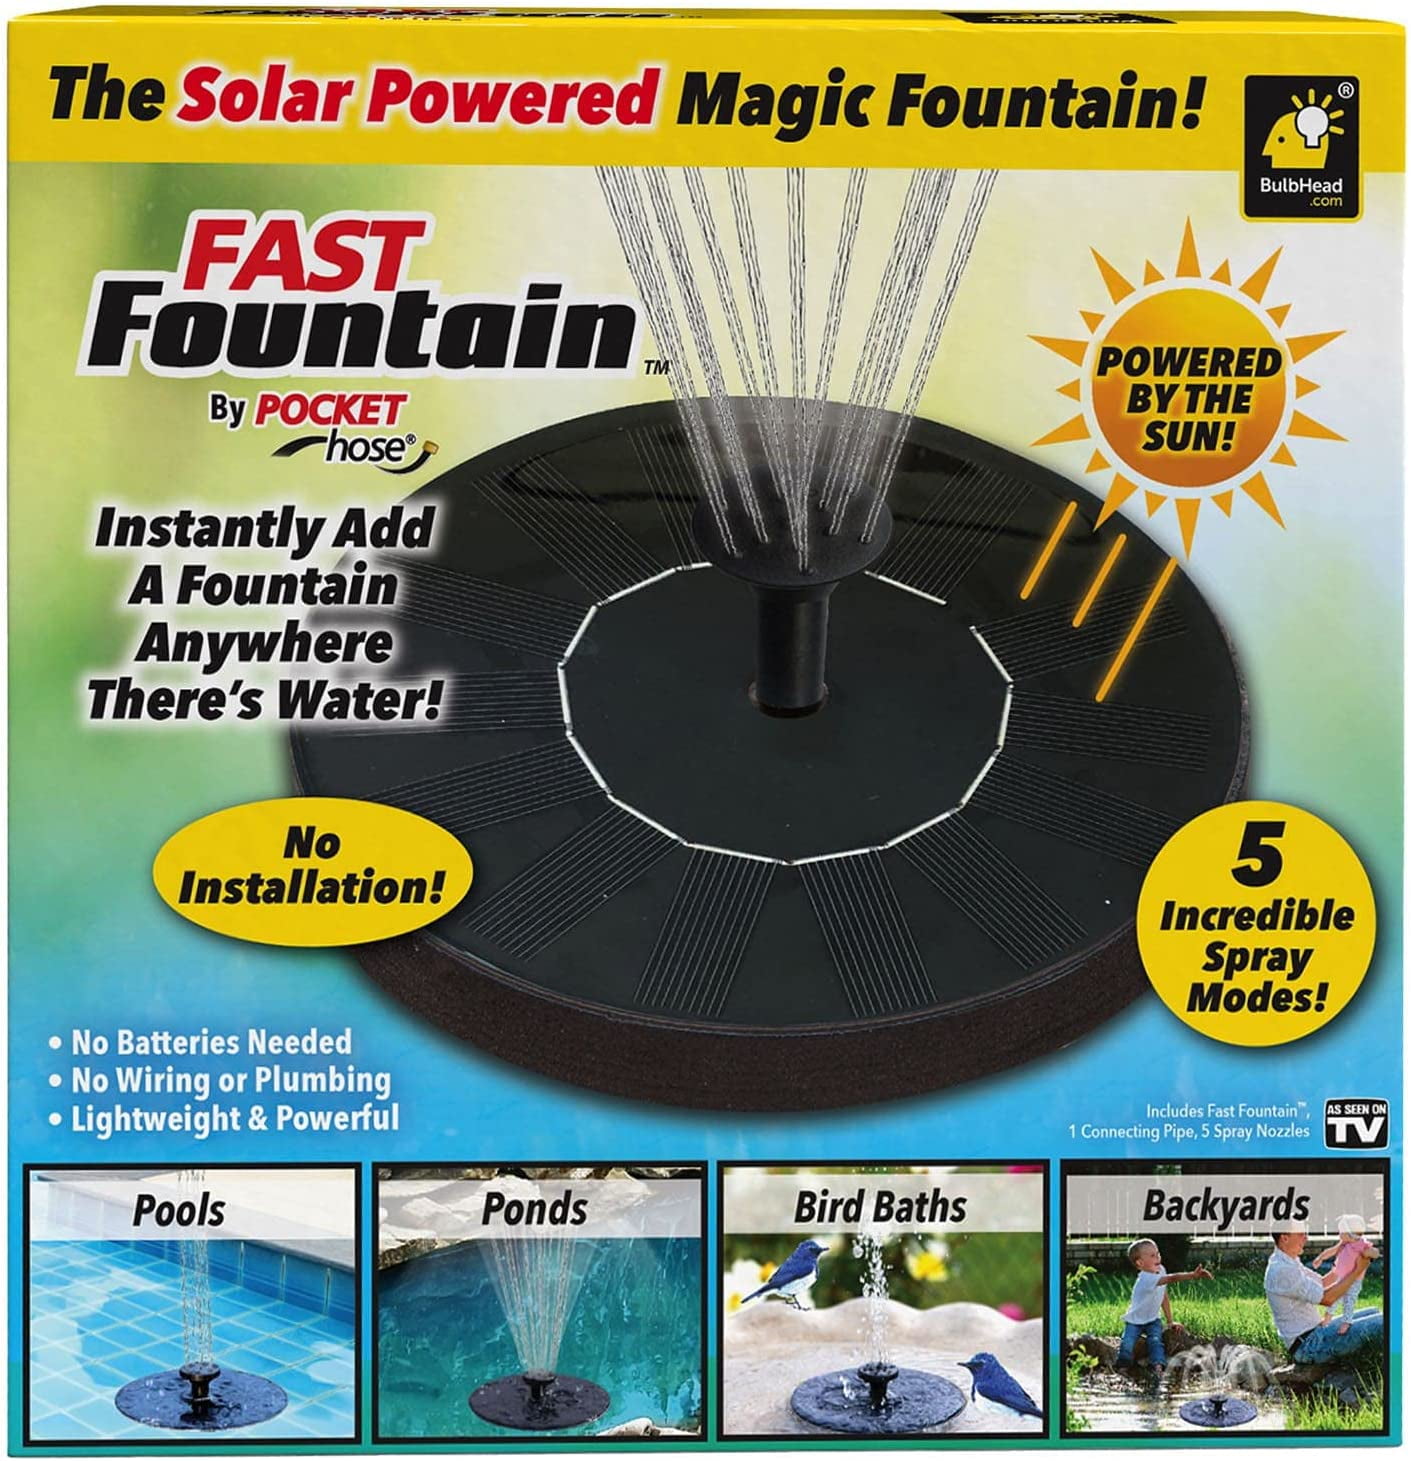 Fast Fountain Pools Fountain, Water Solar Hose, Seen Pocket Power and on Plastic TV, as Ponds, by